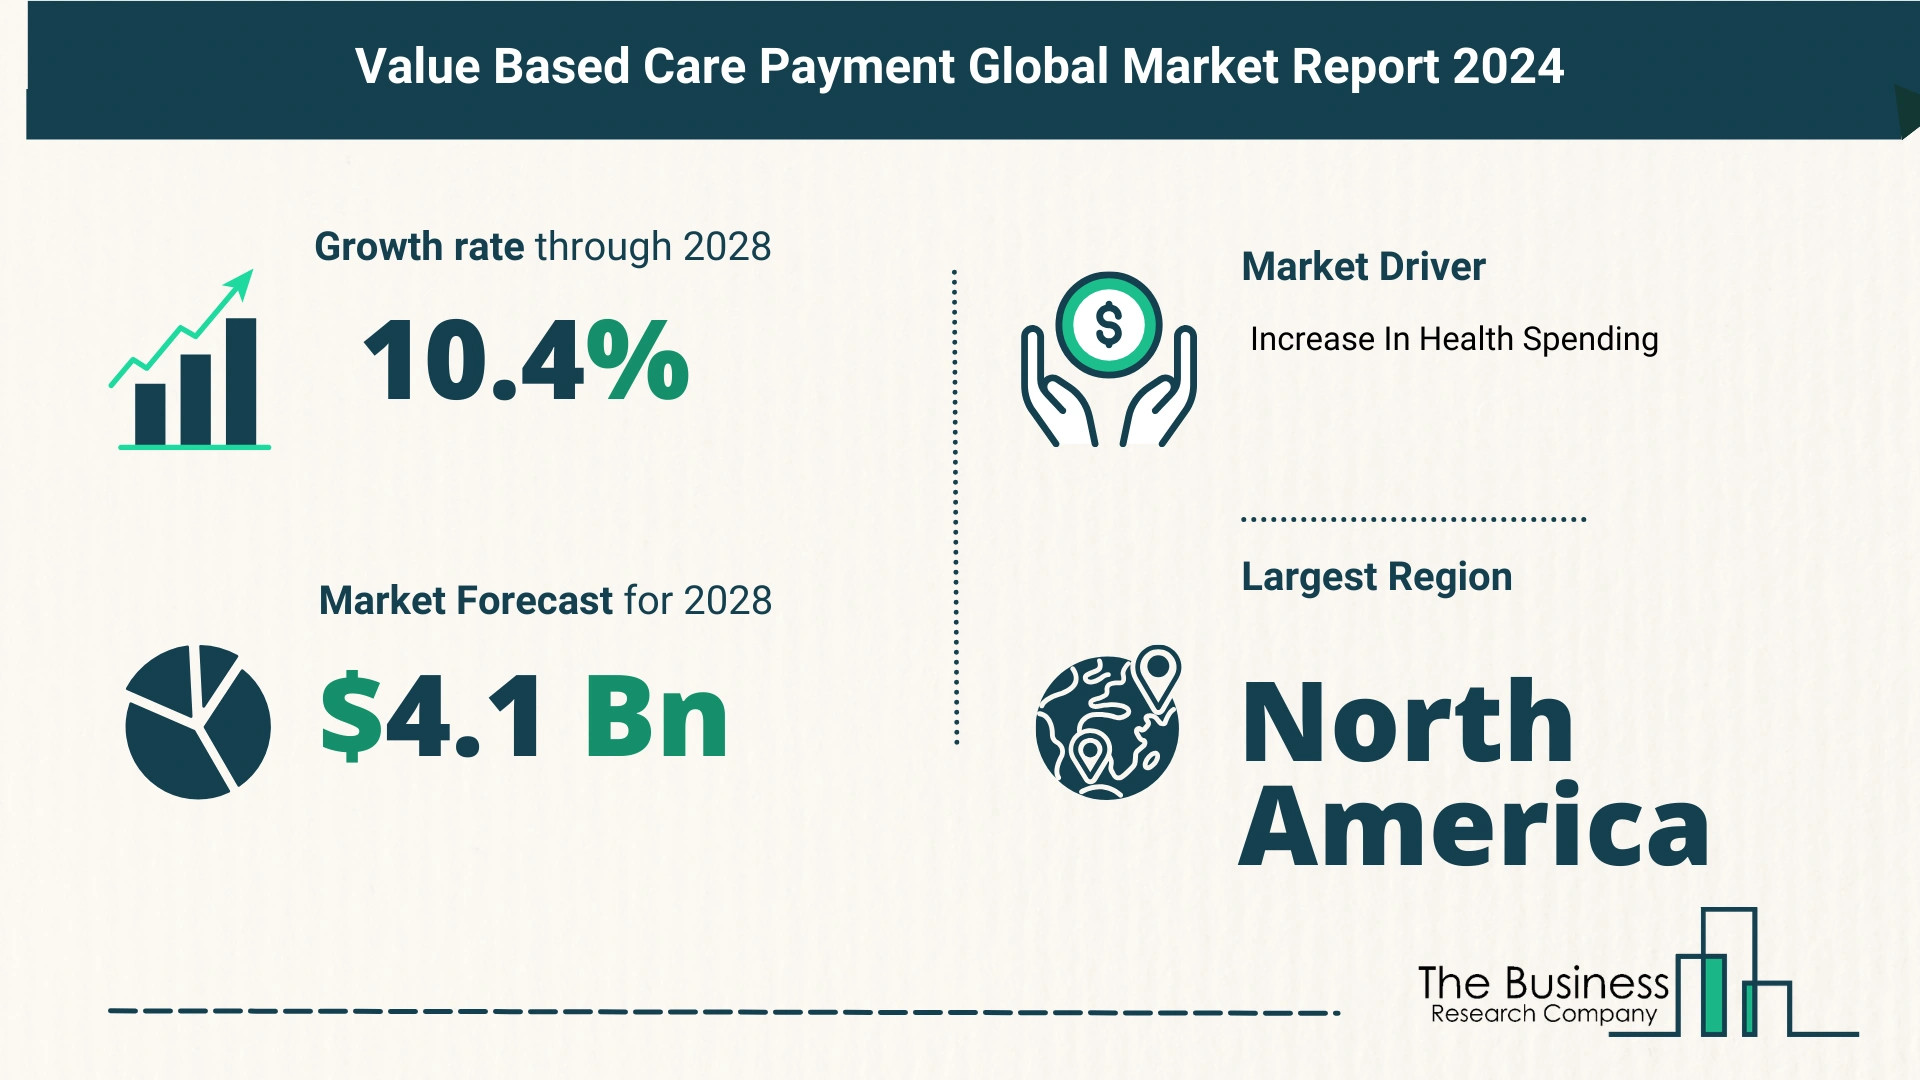 Value Based Care Payment Market Report 2024: Market Size, Drivers, And Trends